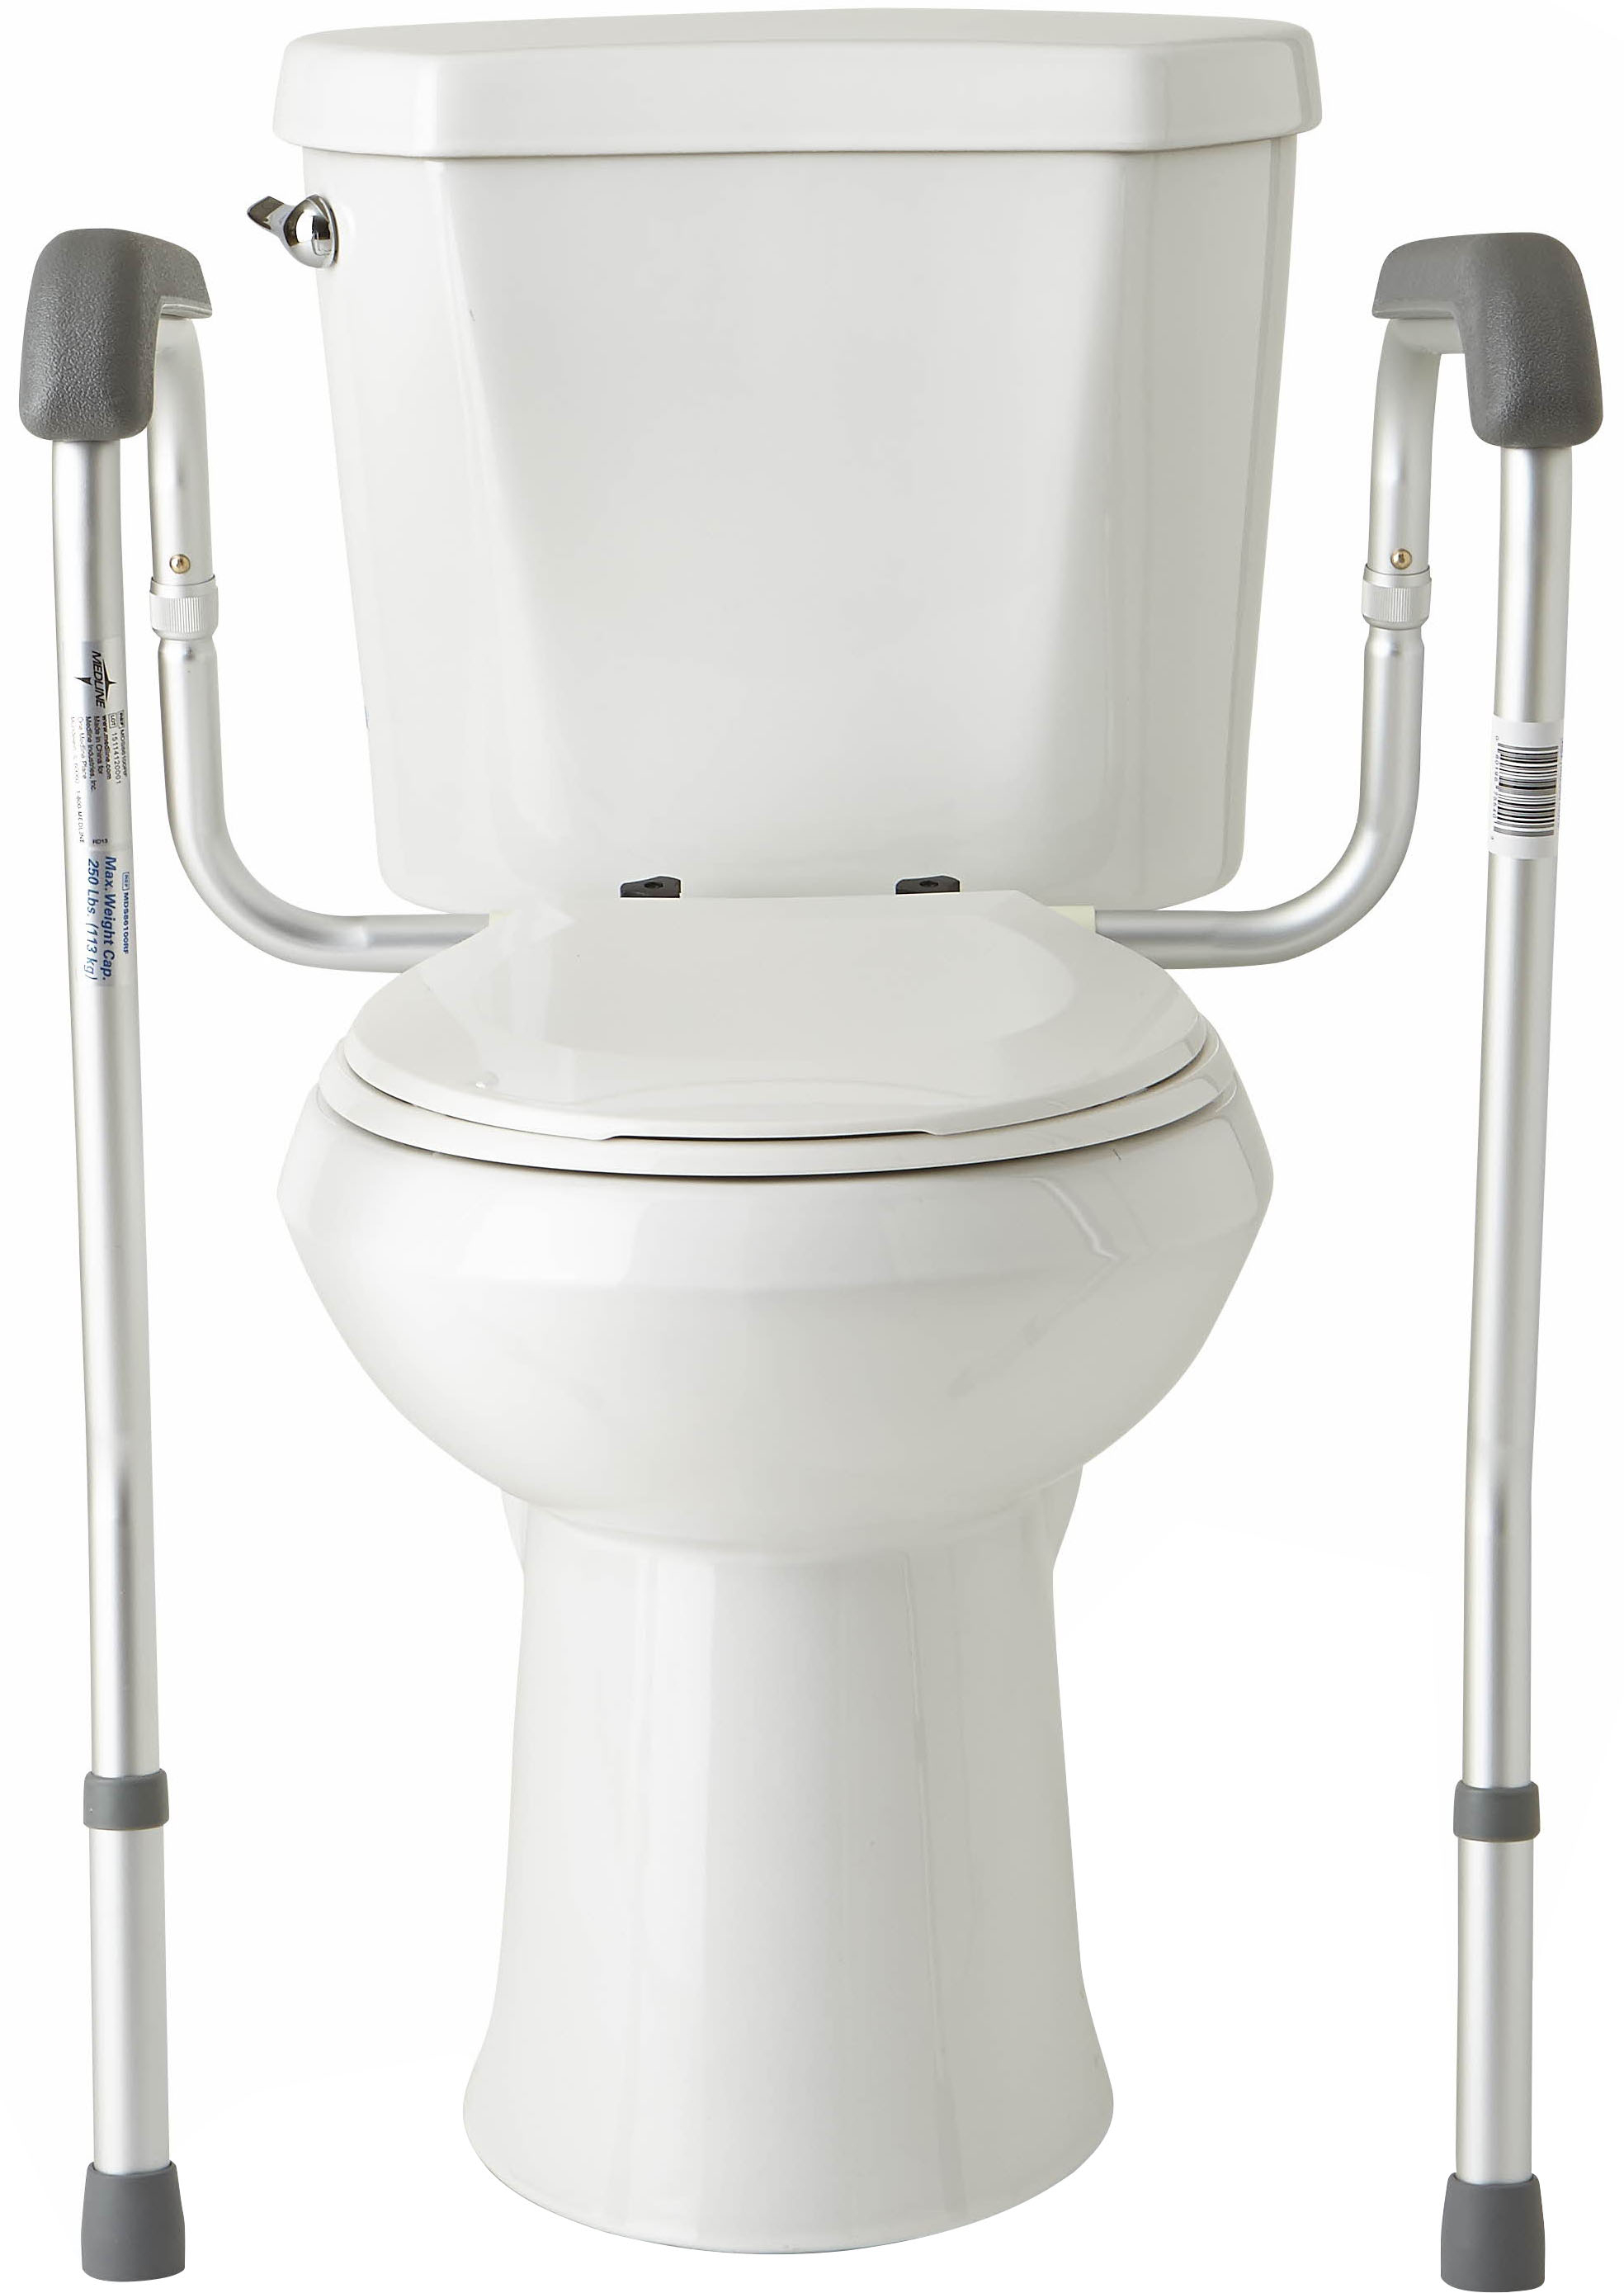 Medline Guardian Toilet Safety Rails, 300-lb. Weight Capacity, One Pair for One Toilet - Silver